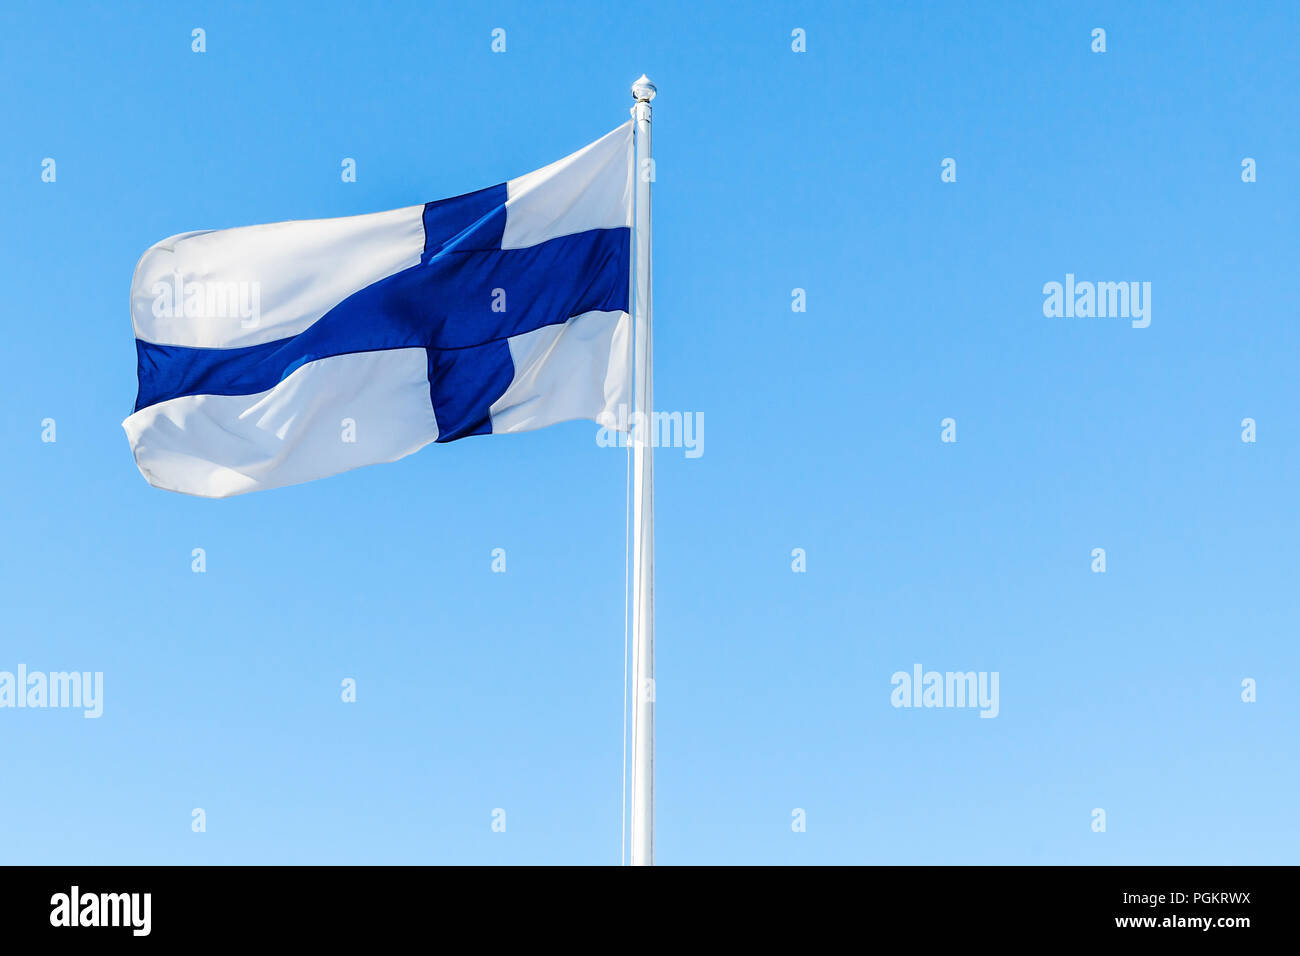 Flag of Finland or Blue Cross Flag over blue sky background Stock Photo